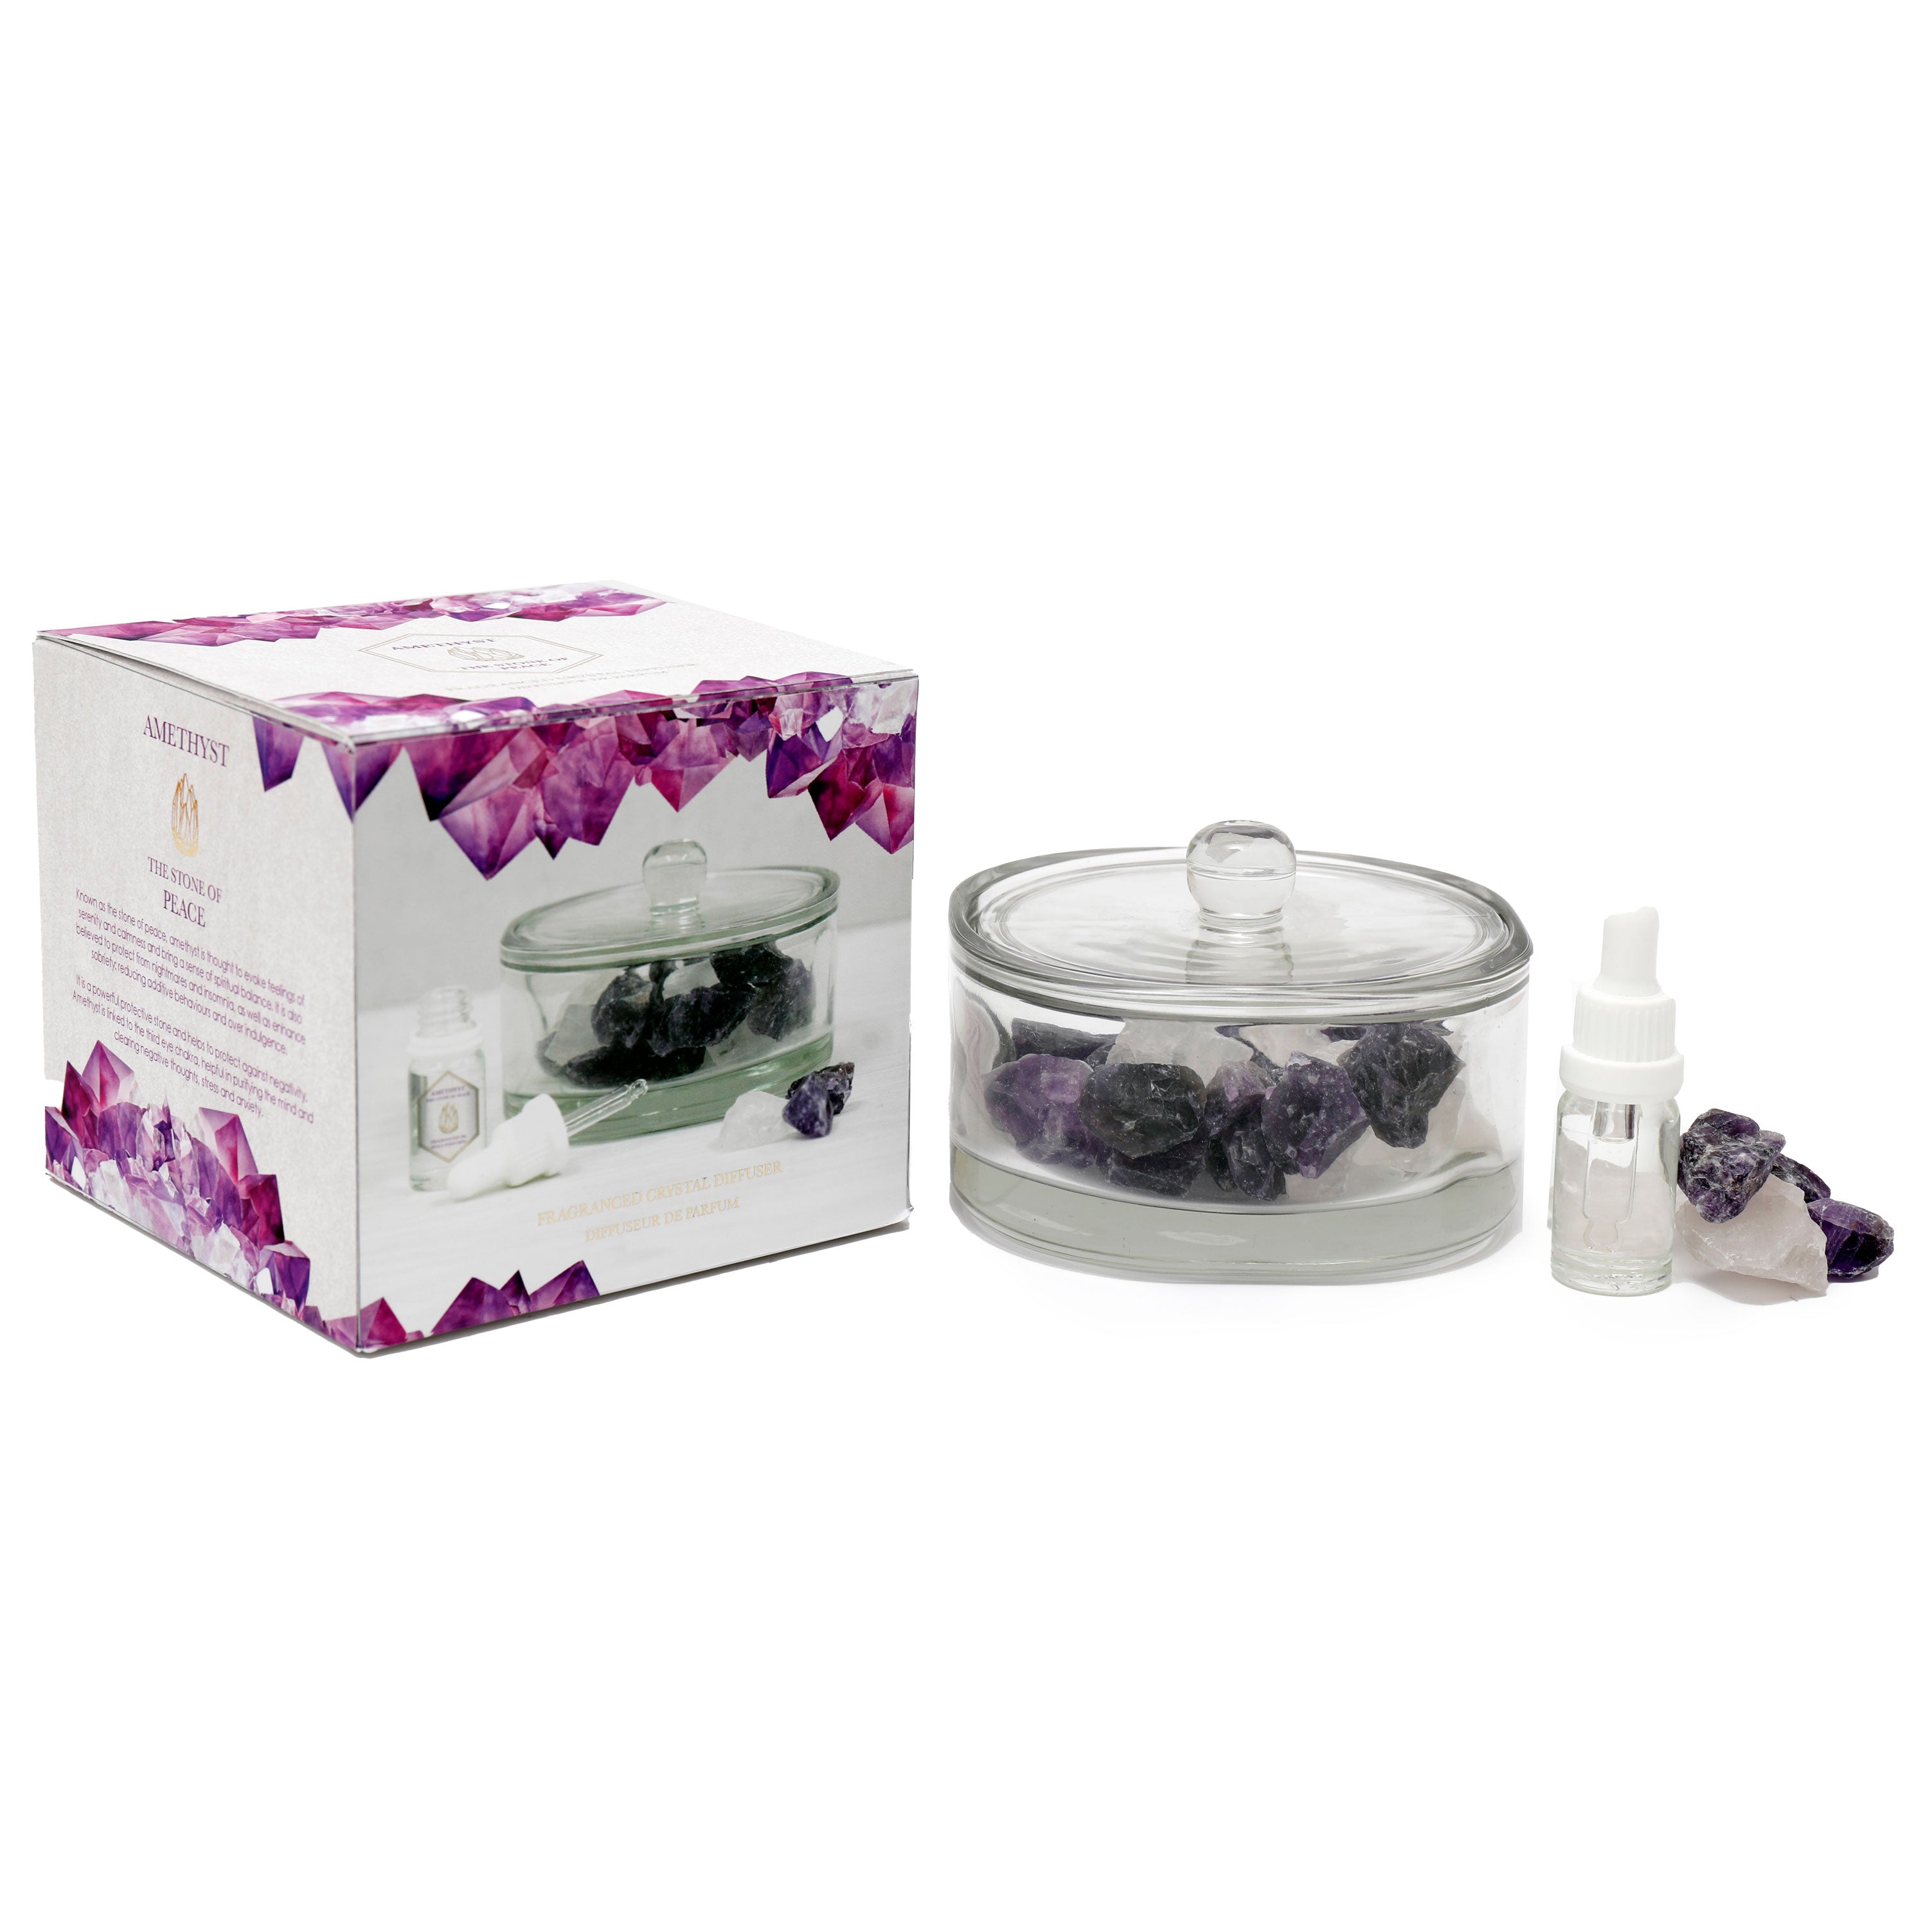 View 400g Amethyst Crystal Oil Diffuser information